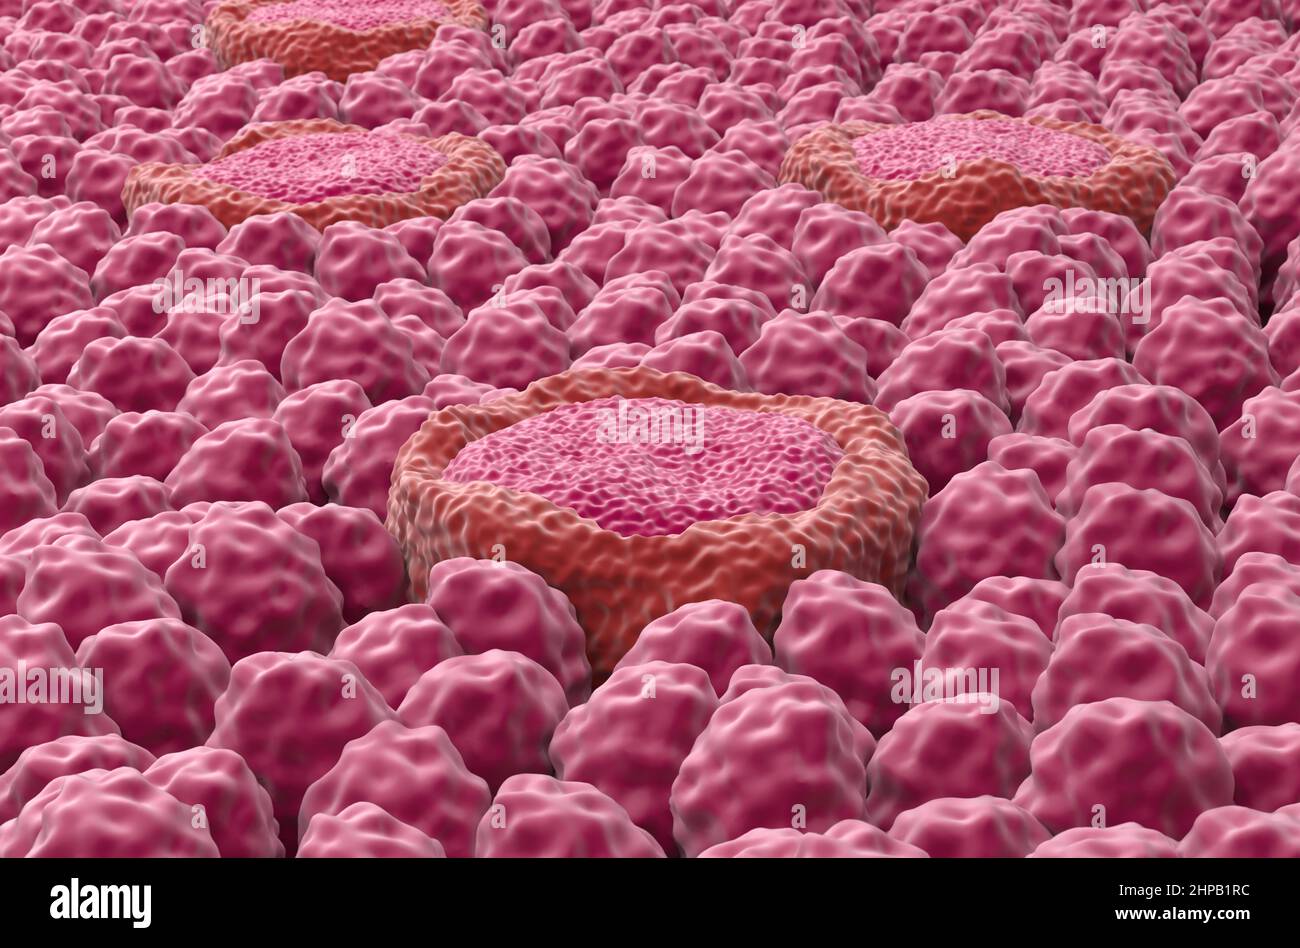 Taste bud receptor fields on the tongue - closeup view 3d illustration Stock Photo